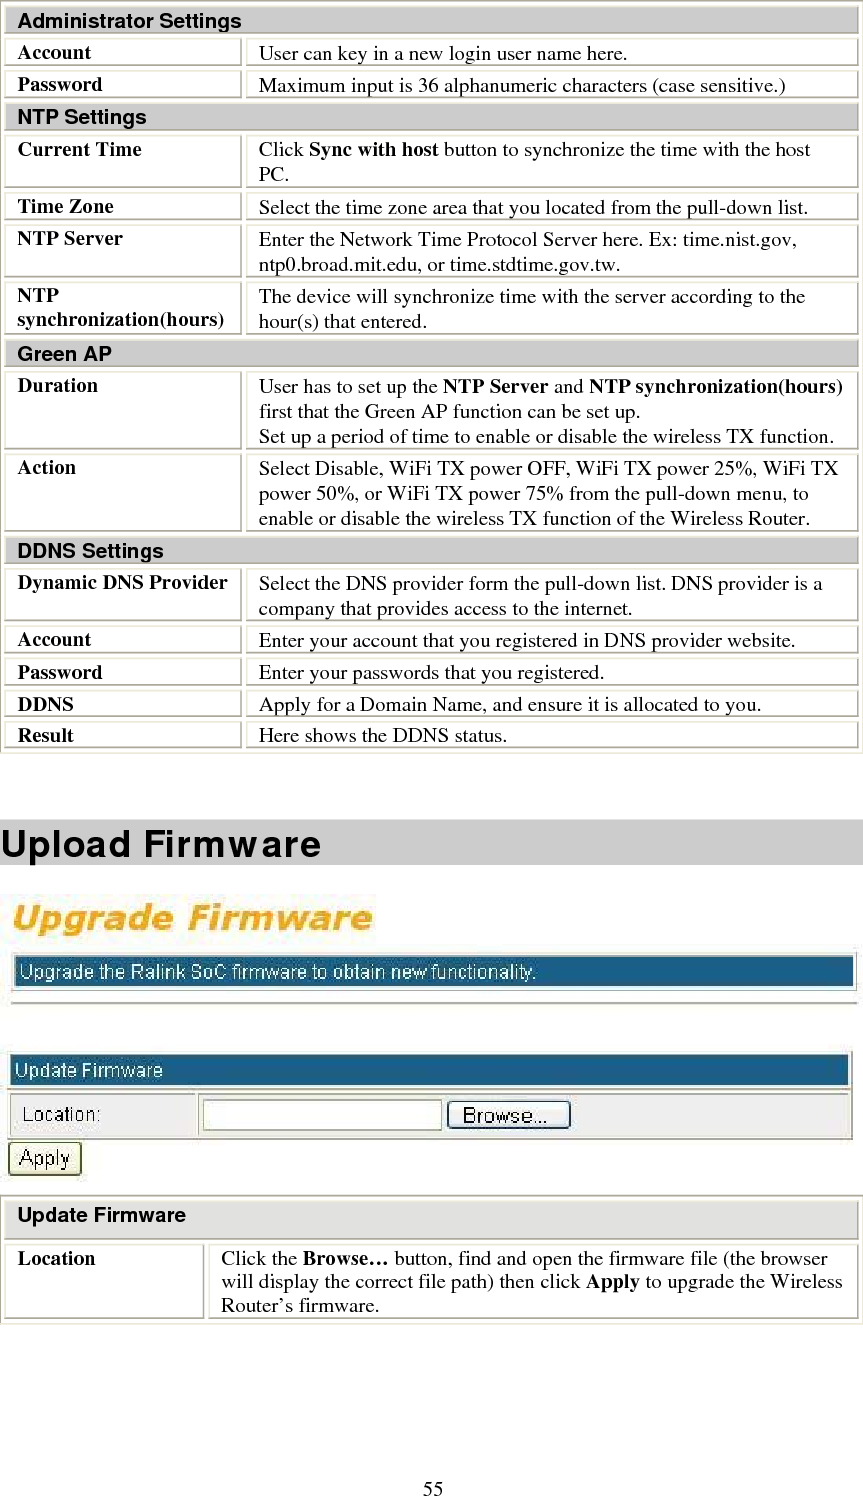   55Administrator Settings Account  User can key in a new login user name here. Password  Maximum input is 36 alphanumeric characters (case sensitive.) NTP Settings Current Time  Click Sync with host button to synchronize the time with the host PC. Time Zone  Select the time zone area that you located from the pull-down list. NTP Server  Enter the Network Time Protocol Server here. Ex: time.nist.gov, ntp0.broad.mit.edu, or time.stdtime.gov.tw. NTP synchronization(hours)  The device will synchronize time with the server according to the hour(s) that entered. Green AP Duration  User has to set up the NTP Server and NTP synchronization(hours) first that the Green AP function can be set up. Set up a period of time to enable or disable the wireless TX function. Action  Select Disable, WiFi TX power OFF, WiFi TX power 25%, WiFi TX power 50%, or WiFi TX power 75% from the pull-down menu, to enable or disable the wireless TX function of the Wireless Router. DDNS Settings Dynamic DNS Provider  Select the DNS provider form the pull-down list. DNS provider is a company that provides access to the internet. Account  Enter your account that you registered in DNS provider website. Password   Enter your passwords that you registered.  DDNS  Apply for a Domain Name, and ensure it is allocated to you. Result  Here shows the DDNS status.  Upload Firmware  Update Firmware Location  Click the Browse… button, find and open the firmware file (the browser will display the correct file path) then click Apply to upgrade the Wireless Router’s firmware.  